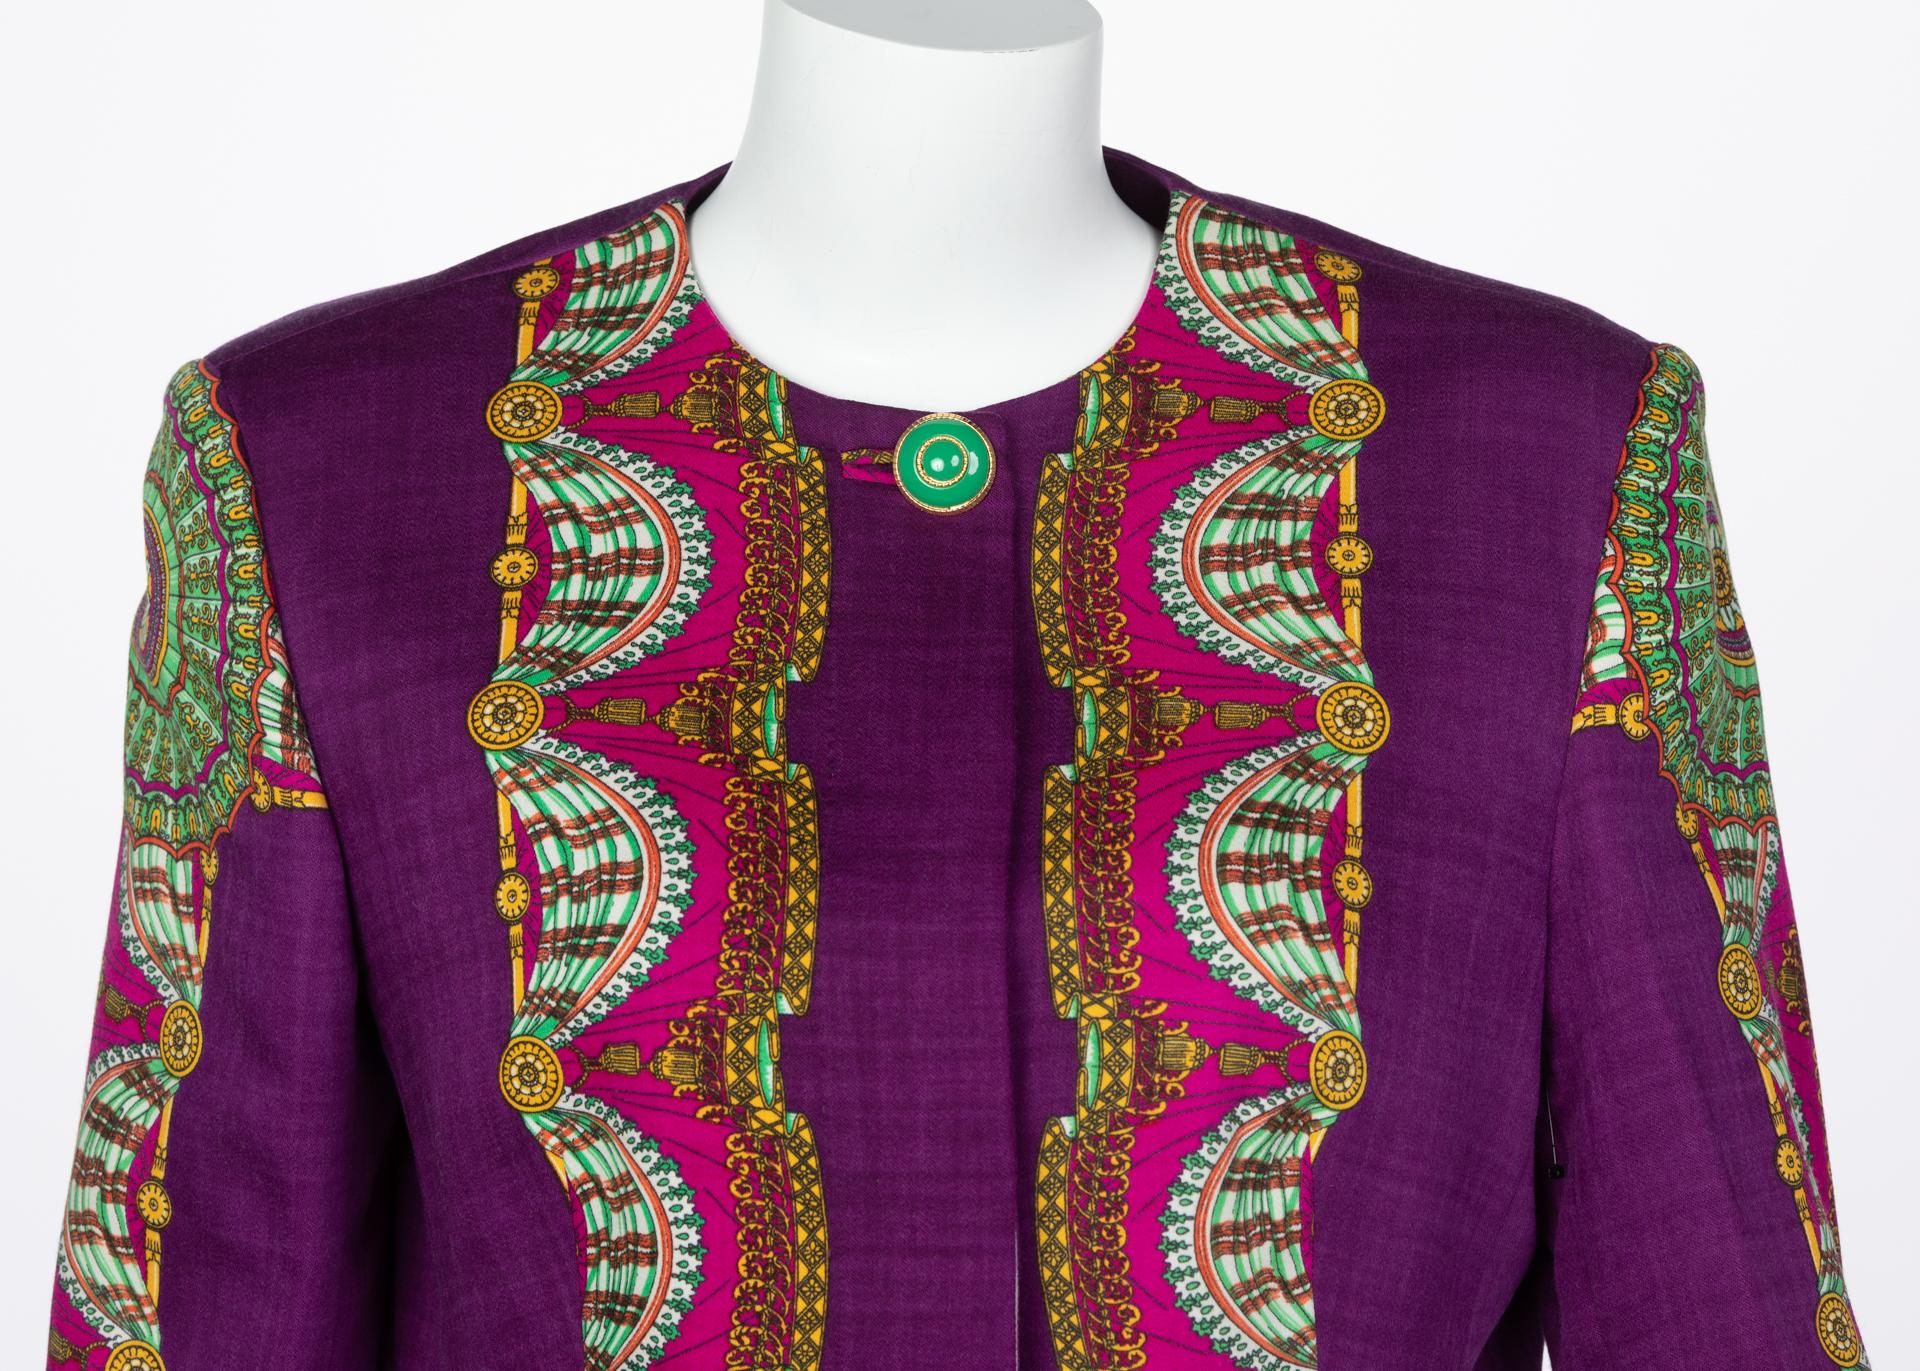 Women's Gianni Versace Couture Purple Green Print Jacket, 1990s For Sale